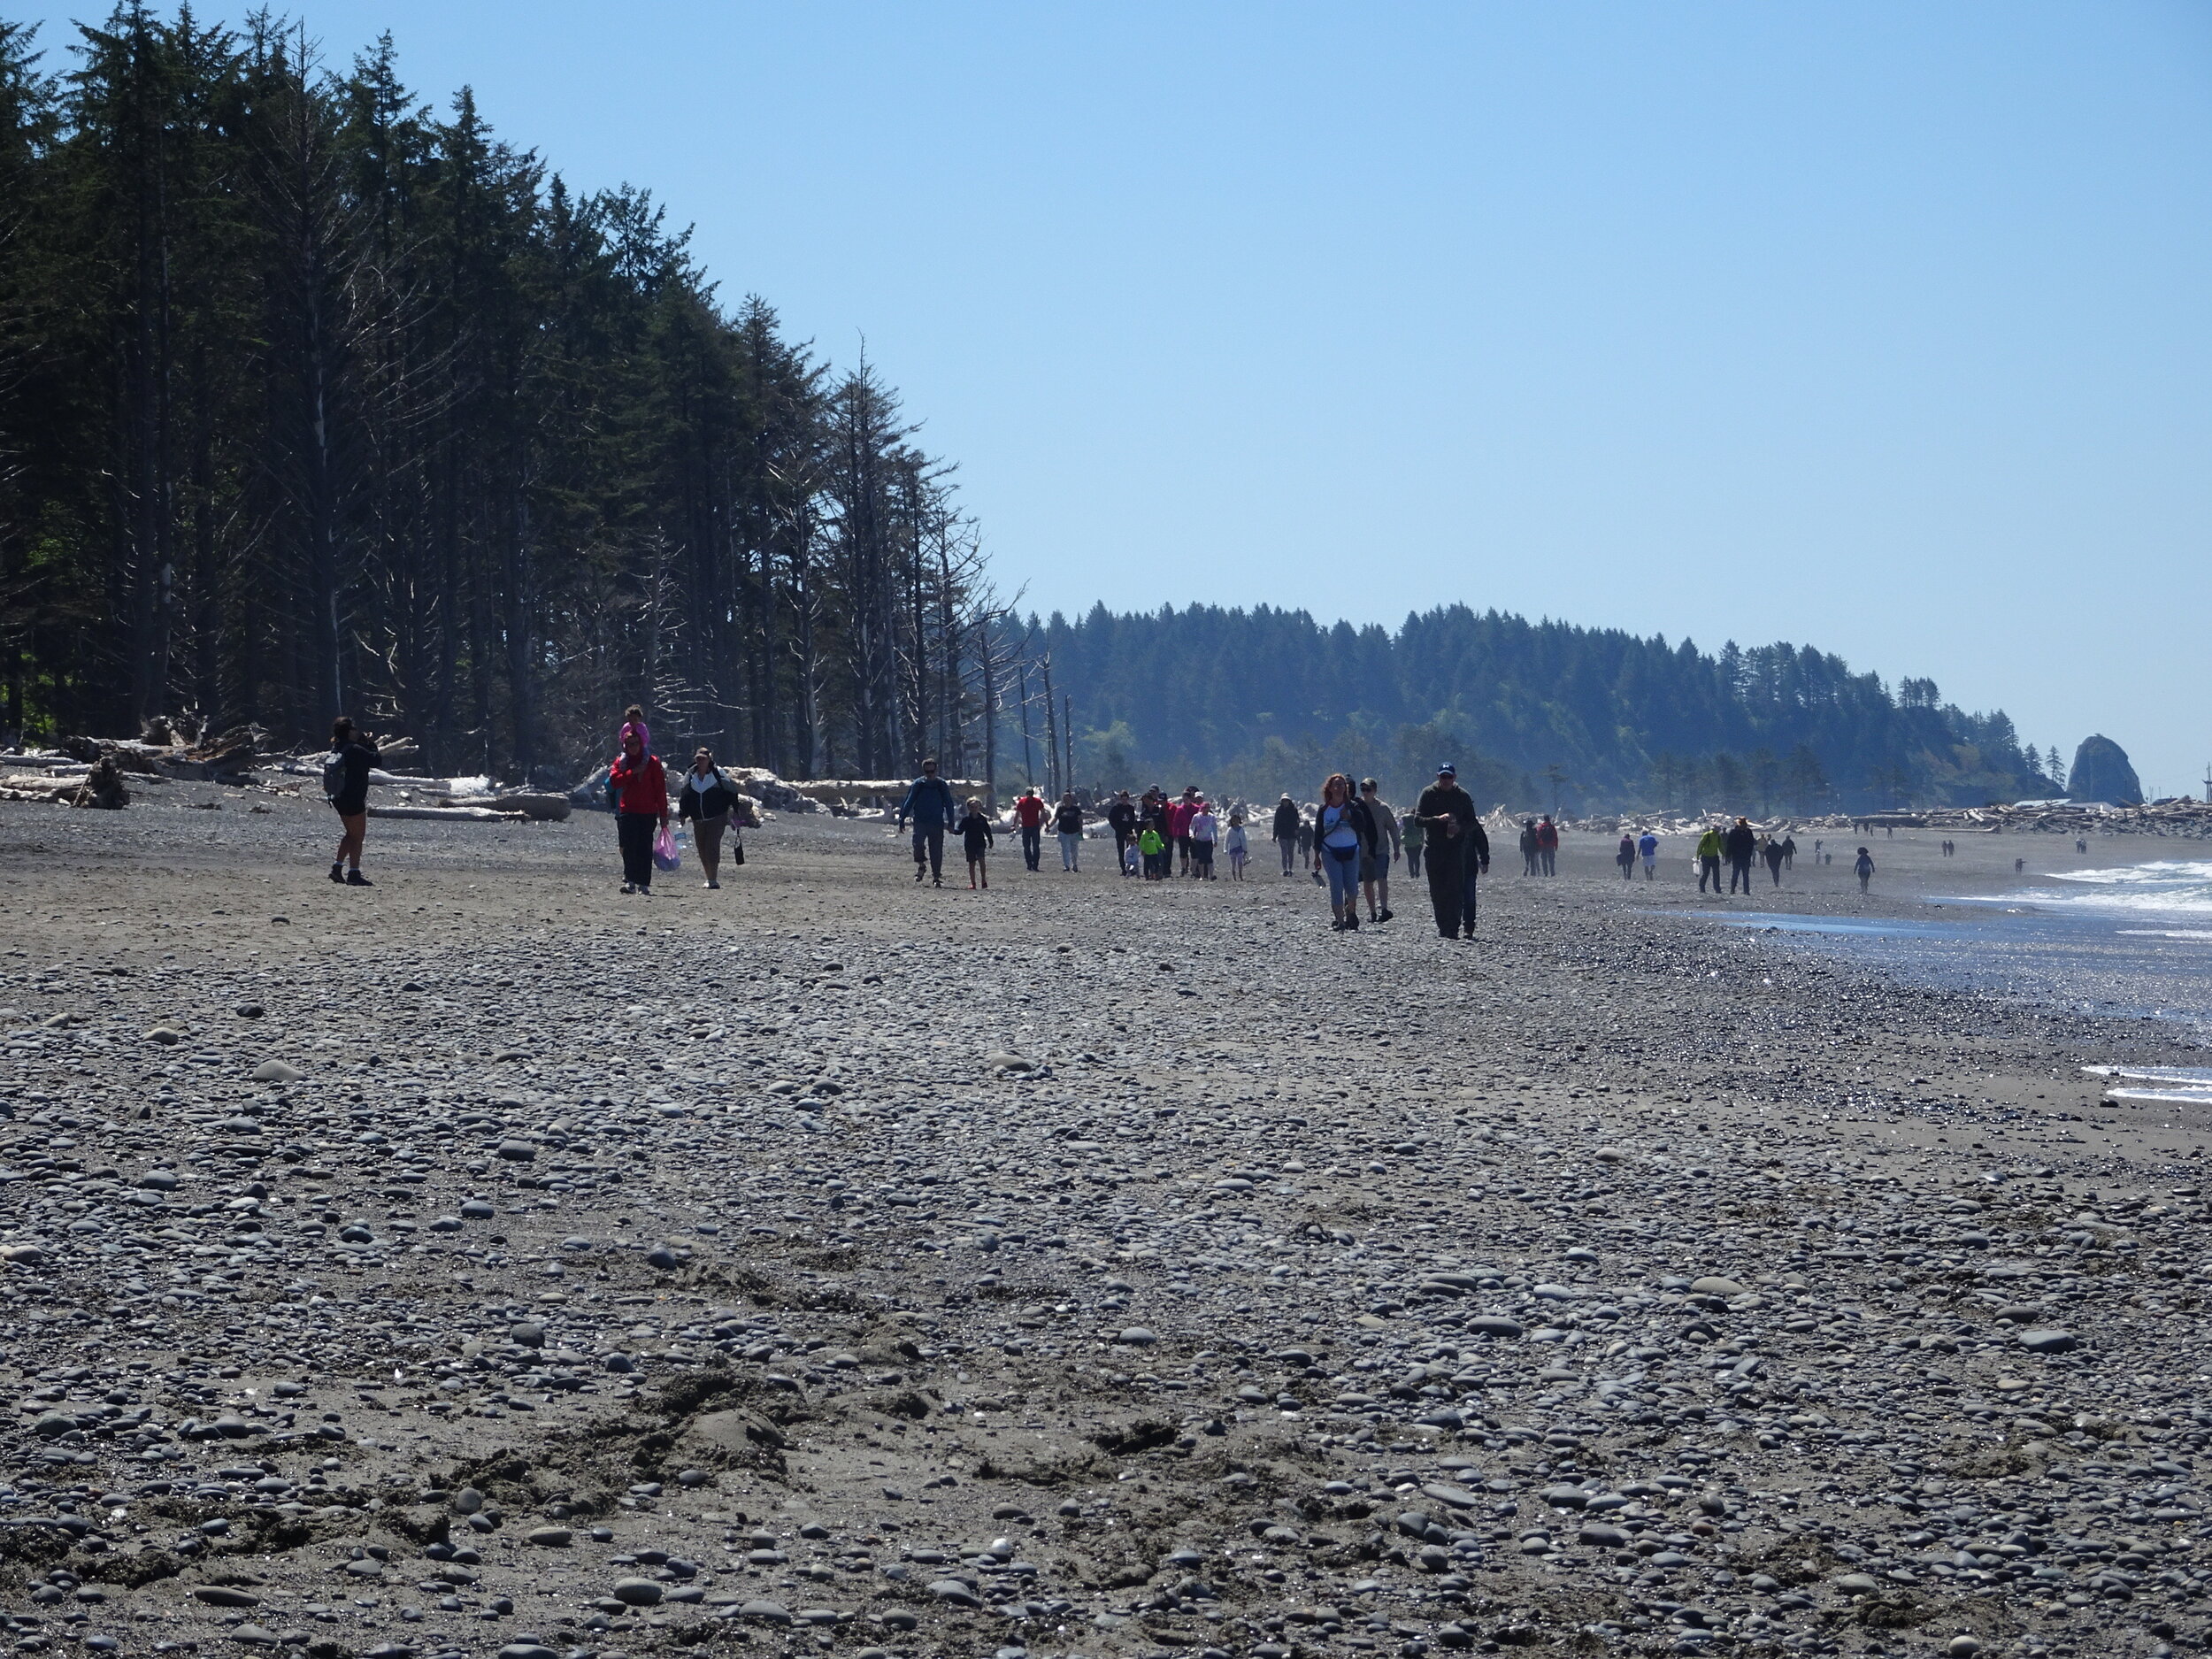 One picture showing just a taste of the crowds the flock to this beach for low tide.  This was our most crowded beach on our visit.  